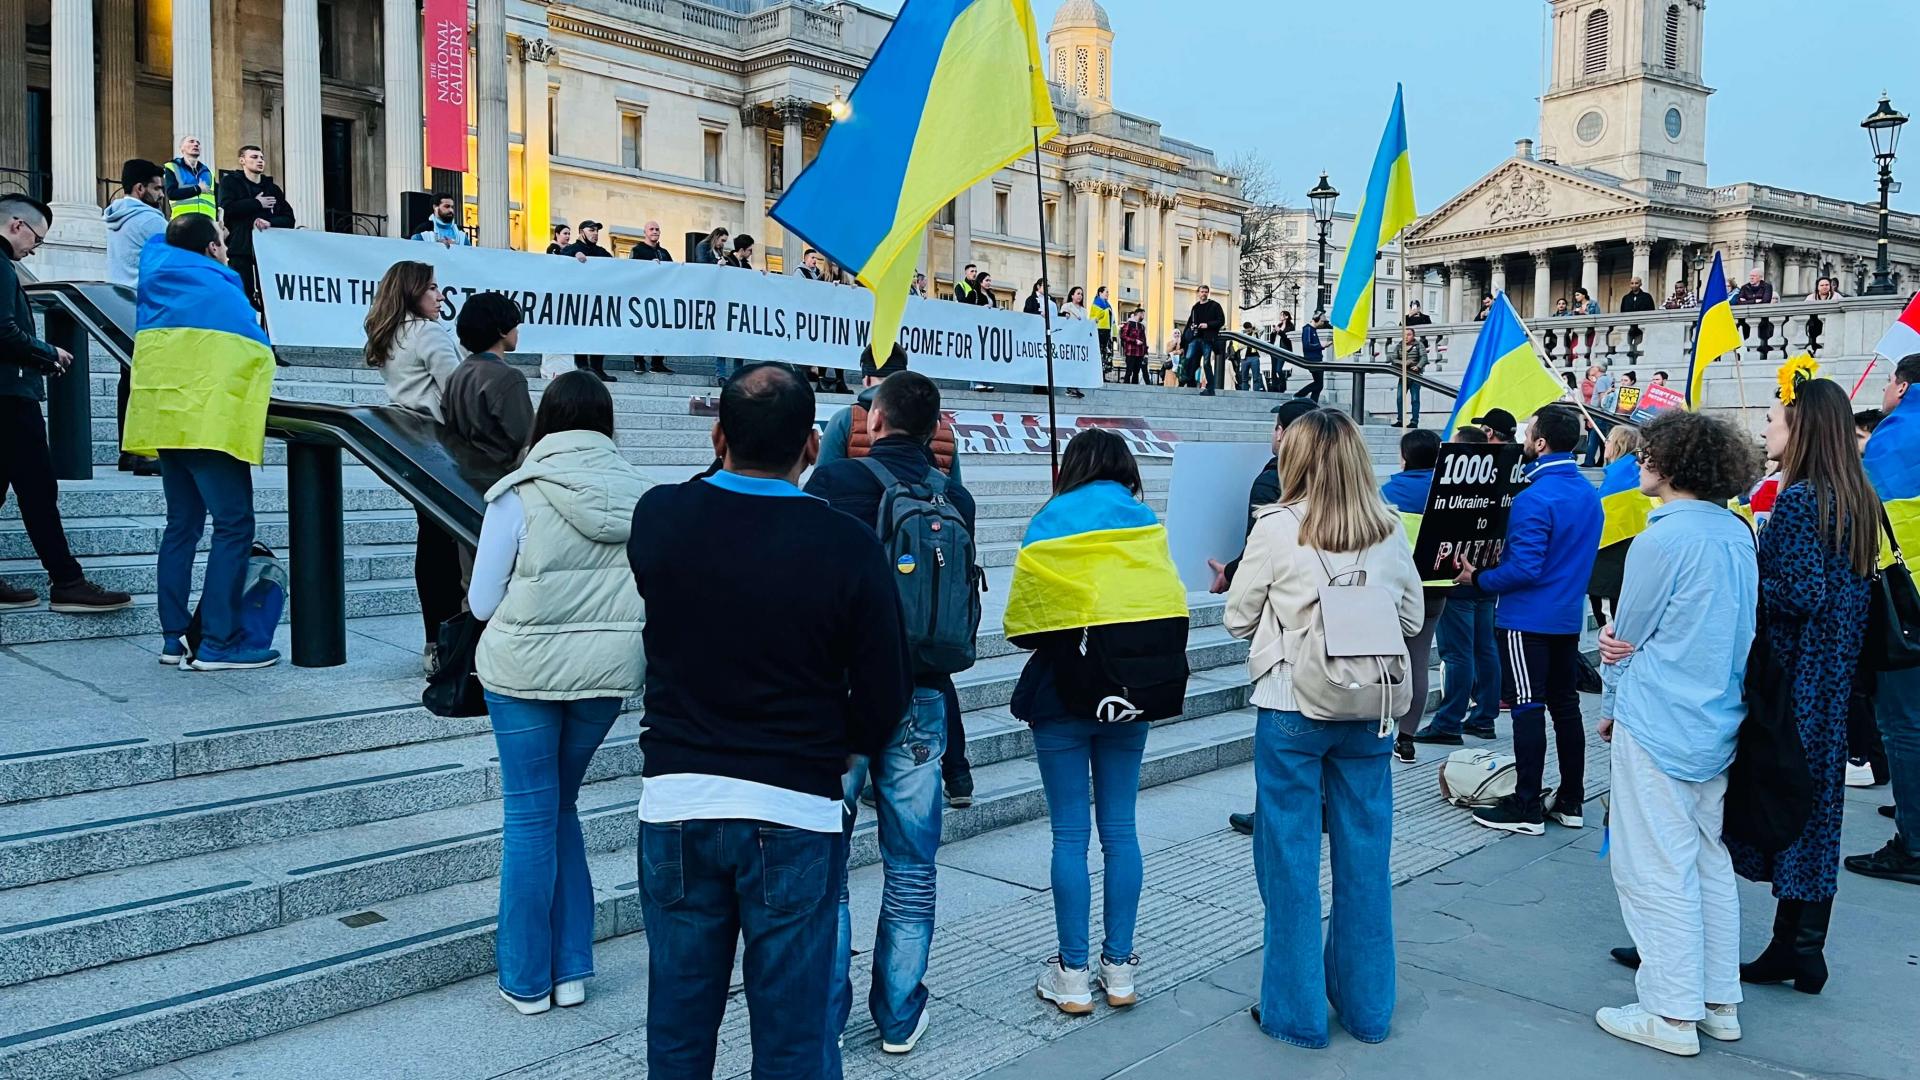 People with Ukrainian flags protesting in London